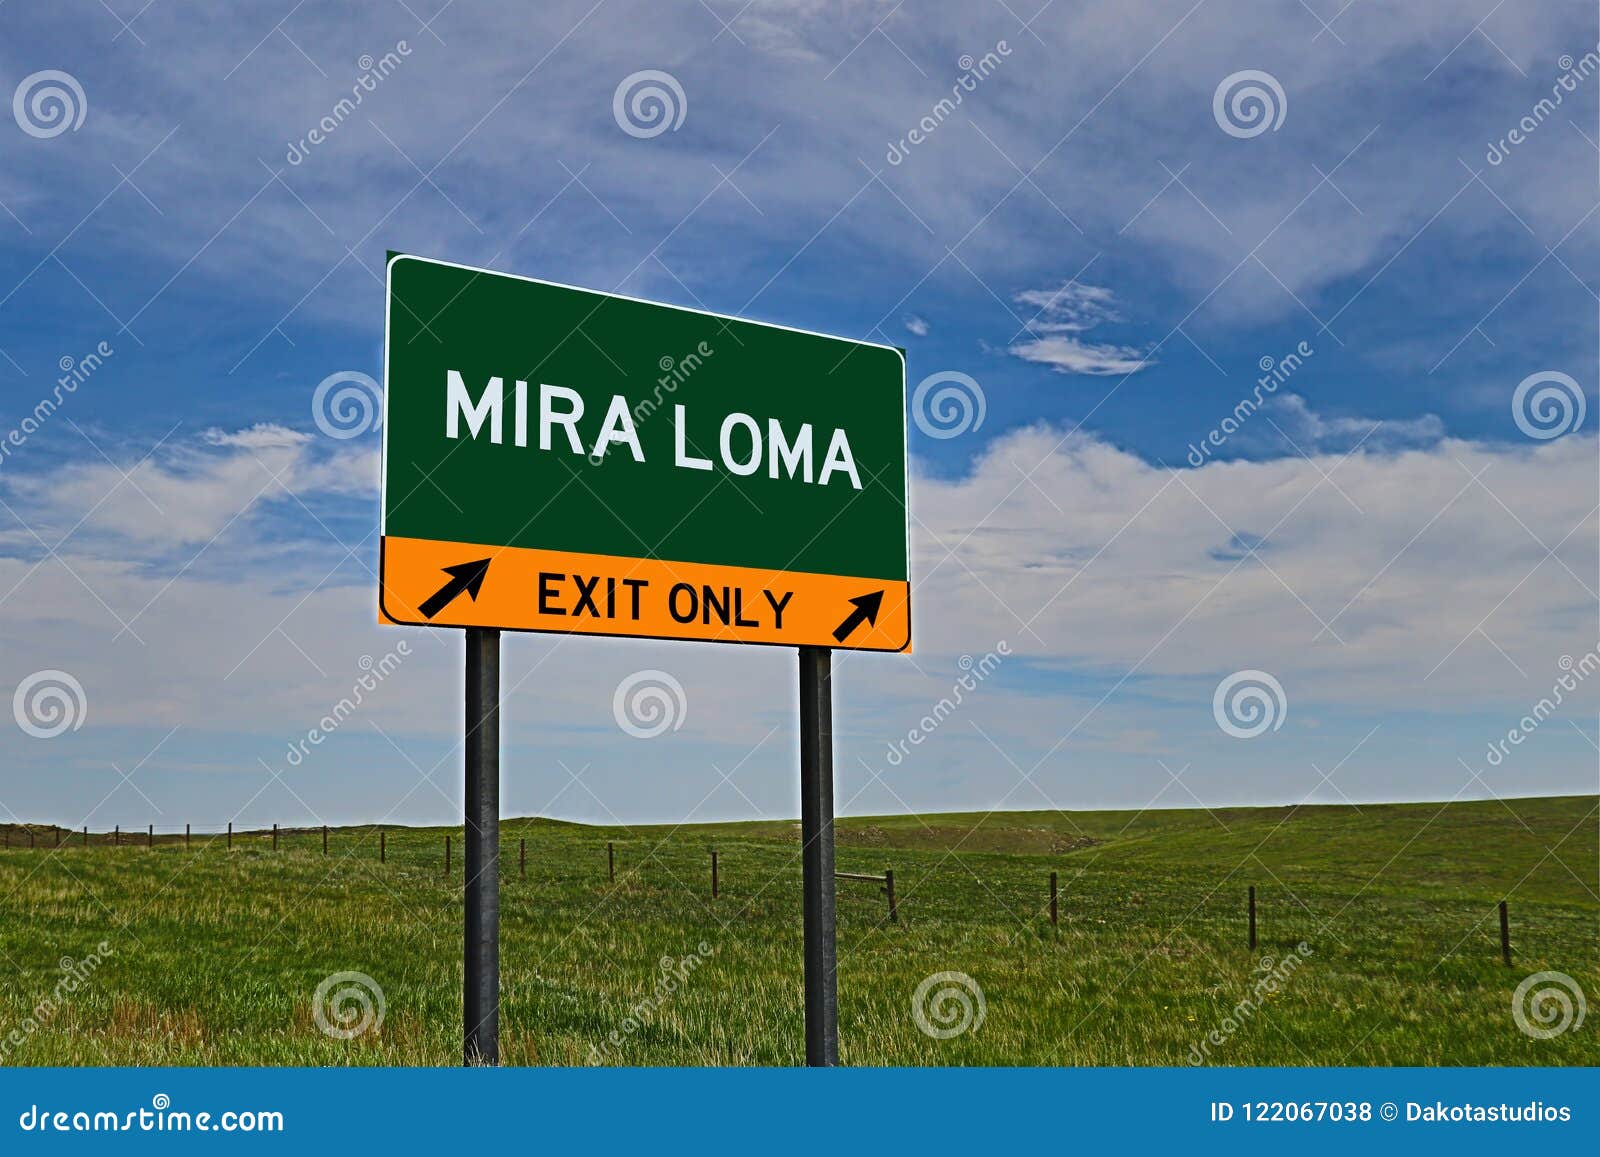 us highway exit sign for mira loma